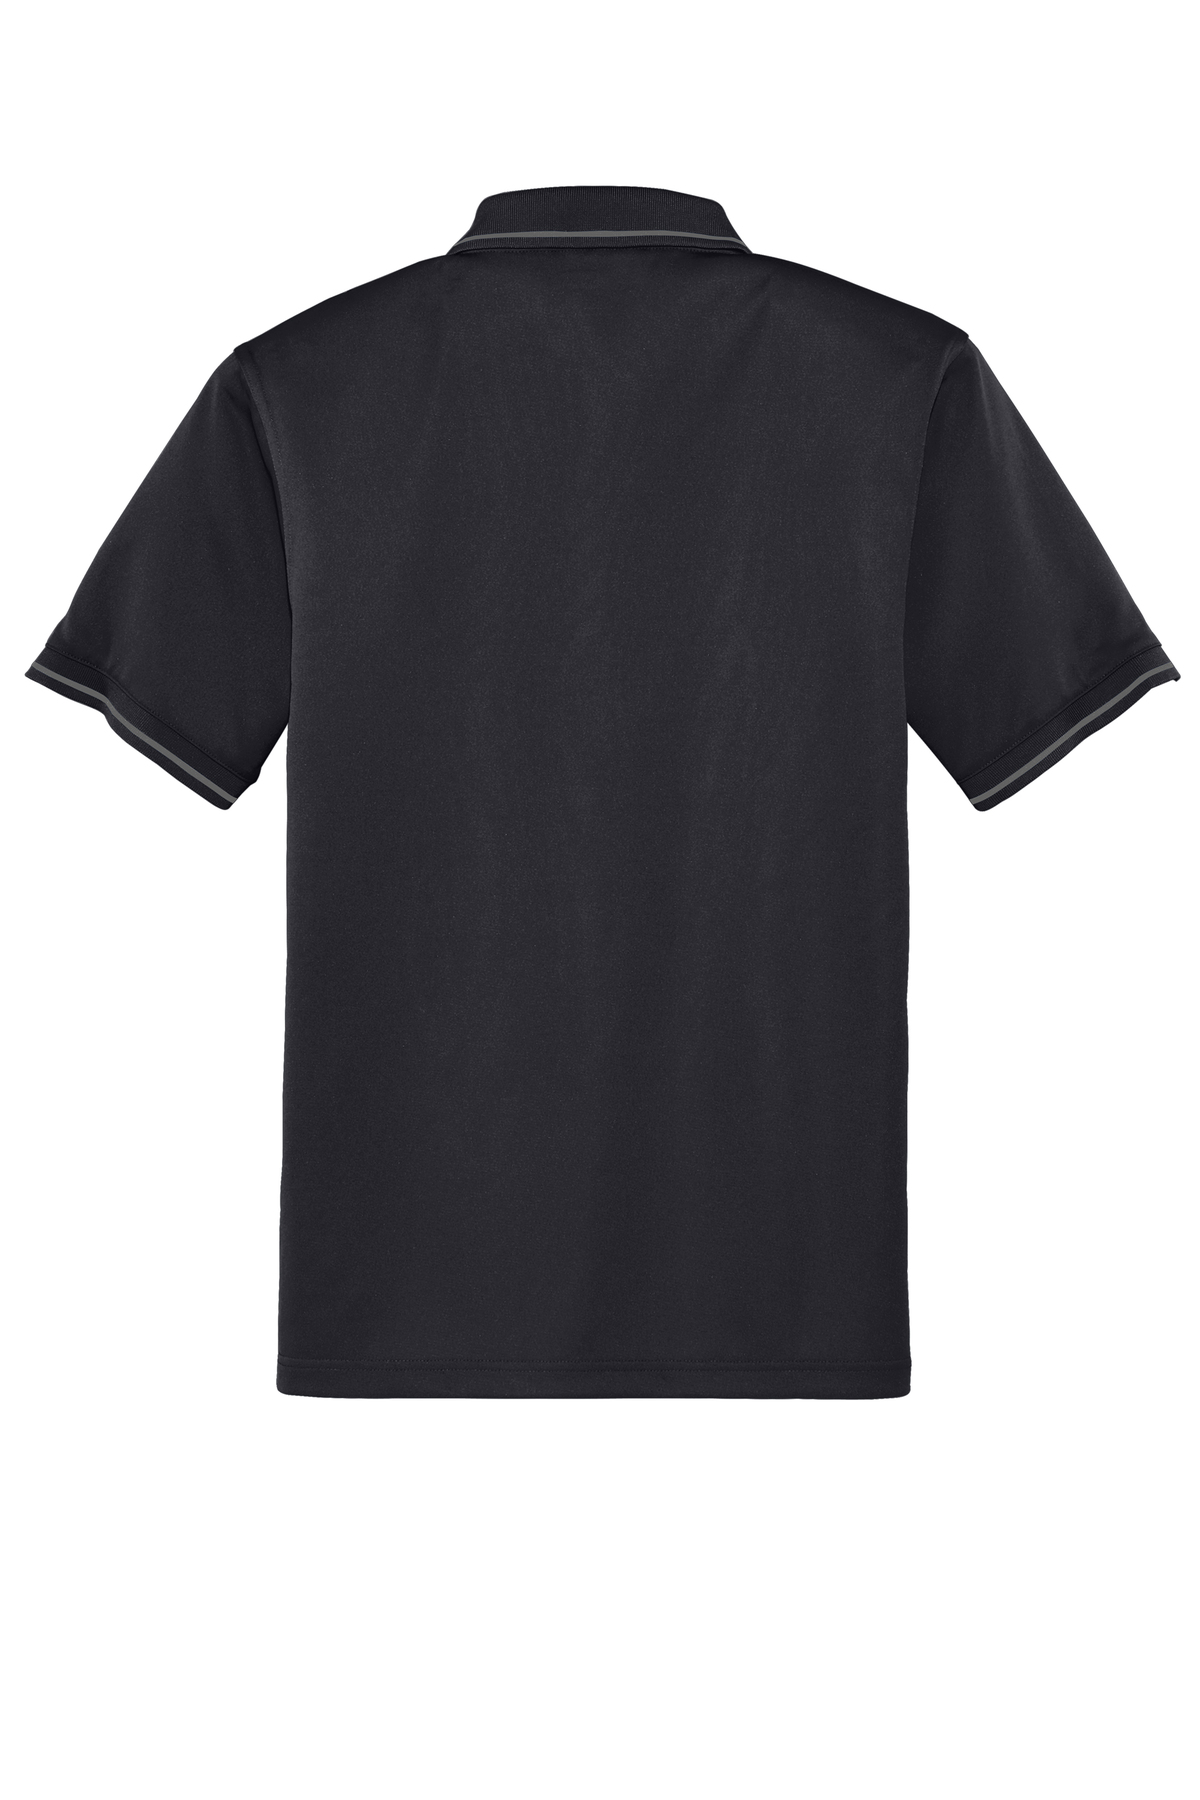 CornerStone Select Snag-Proof Tipped Pocket Polo | Product | SanMar